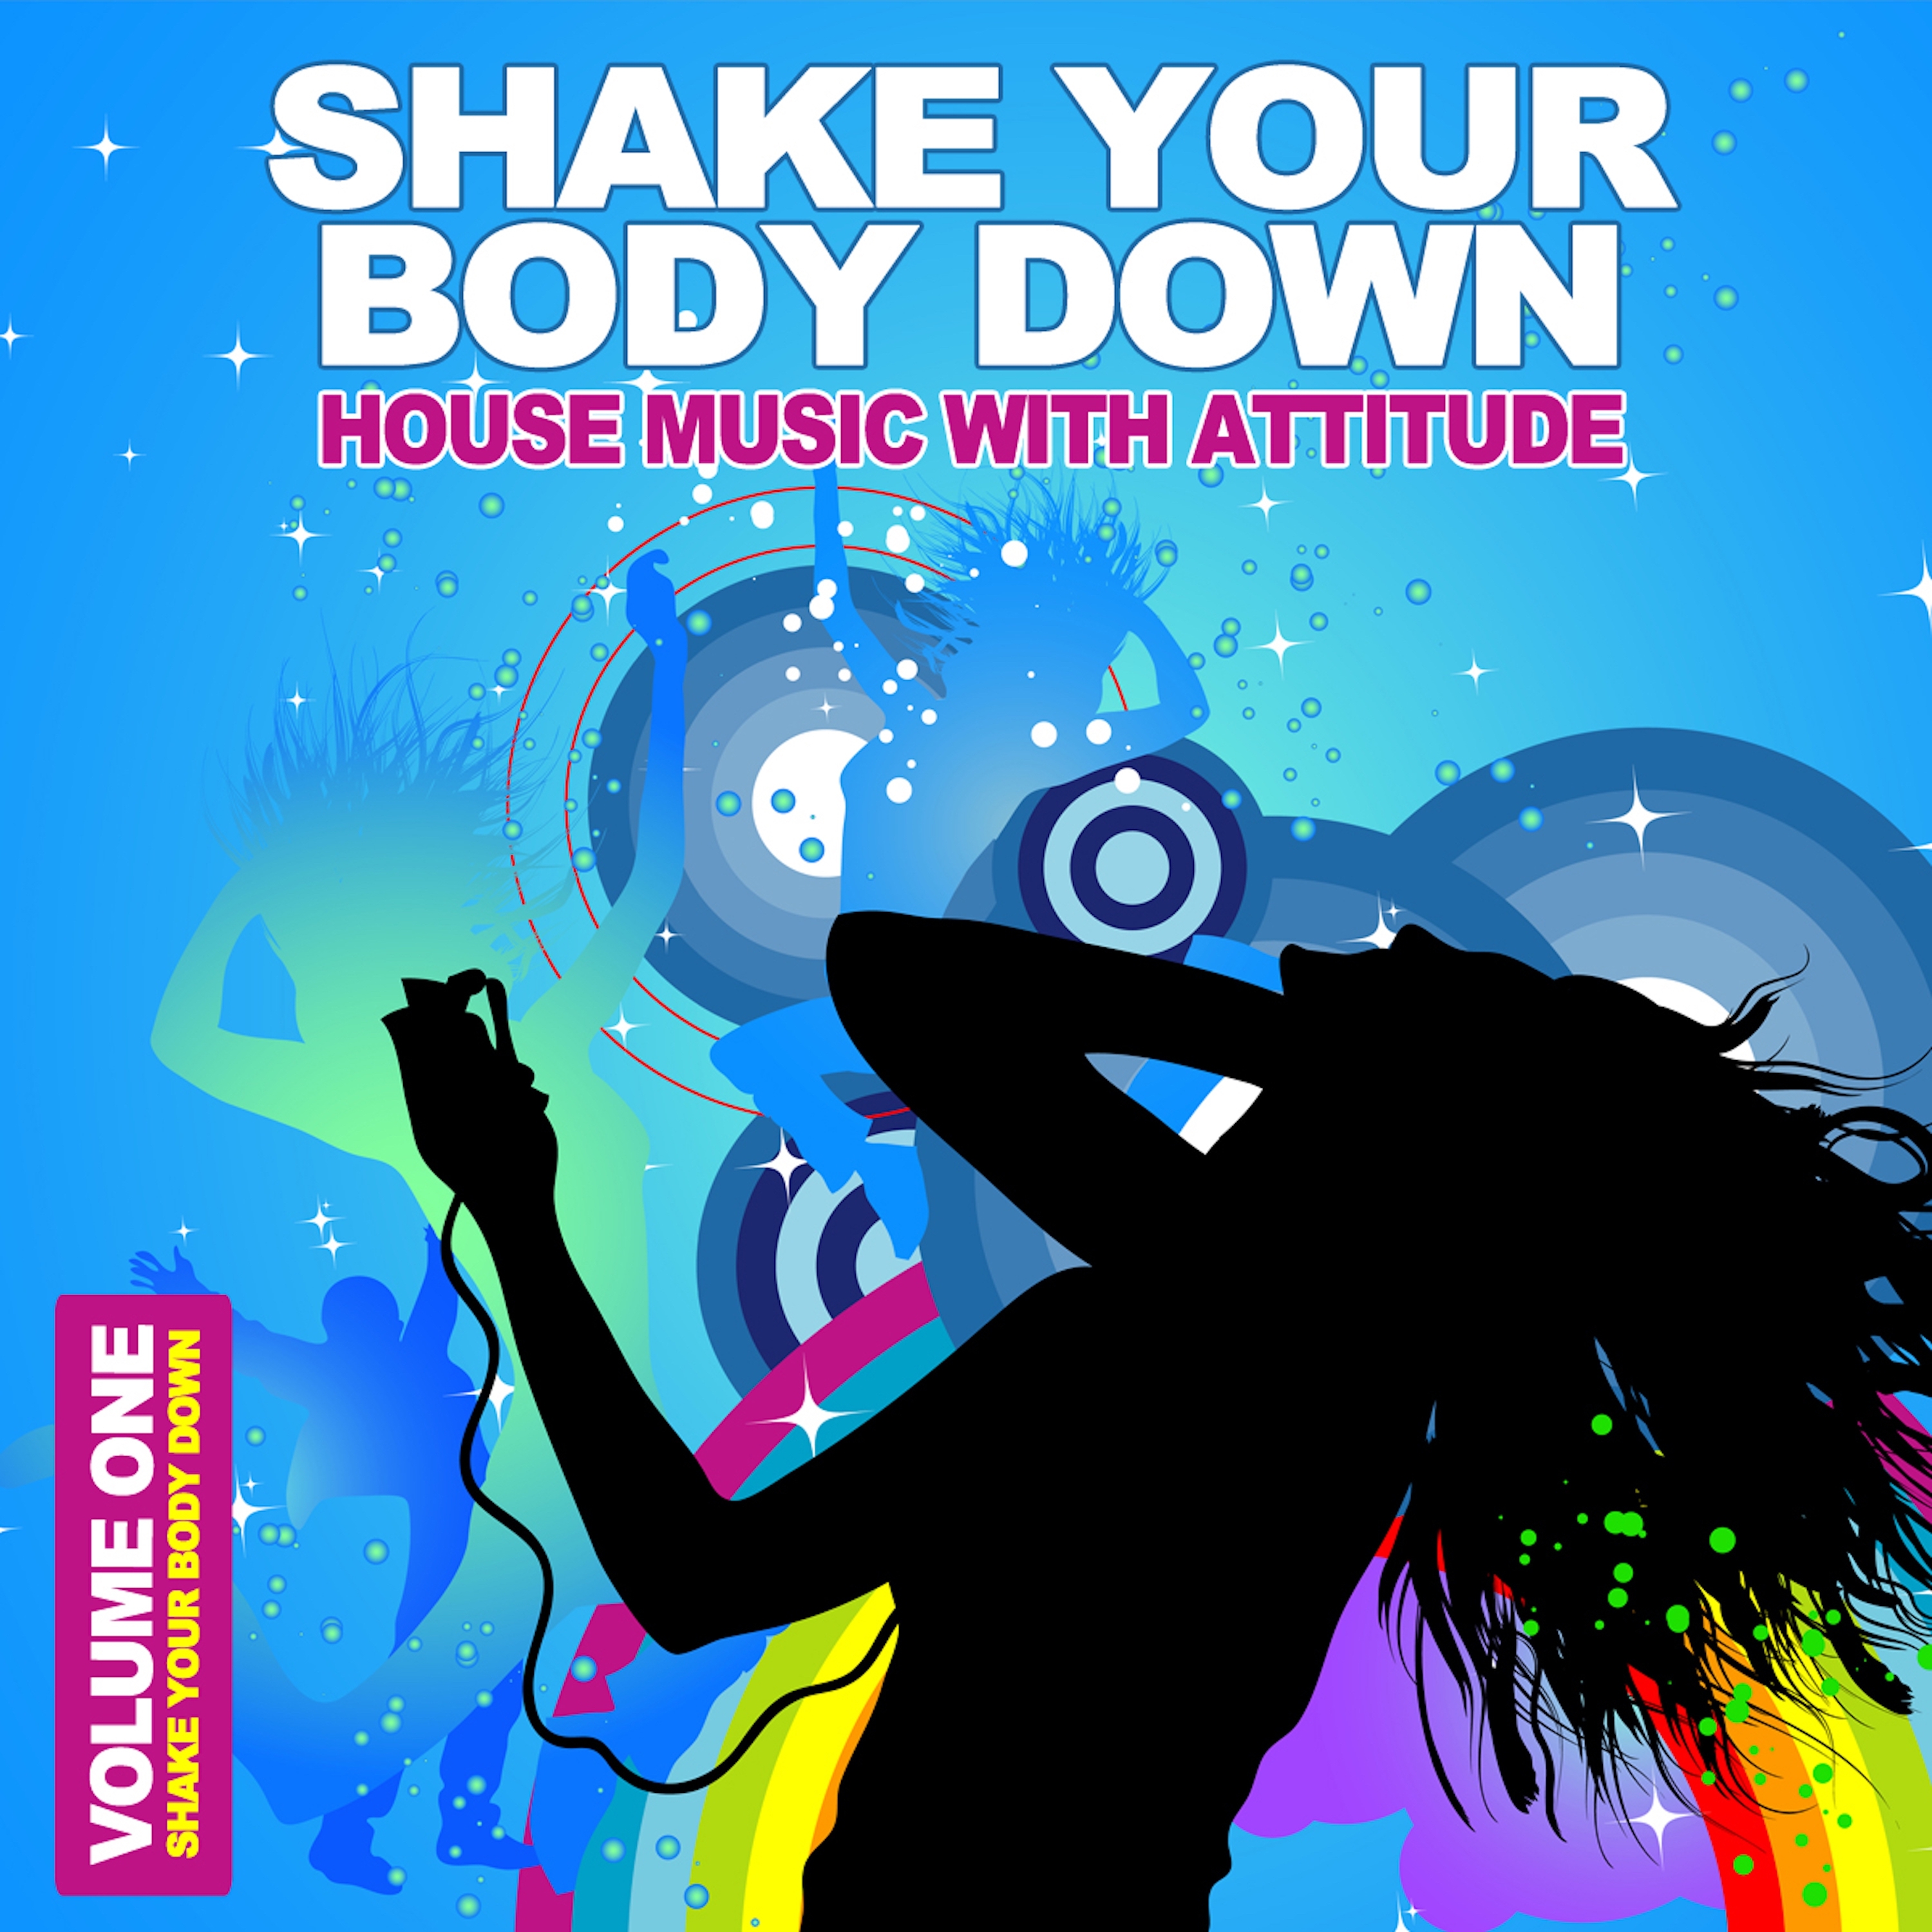 Shake Your Body Down, Vol. 1 - House Music With Attitude